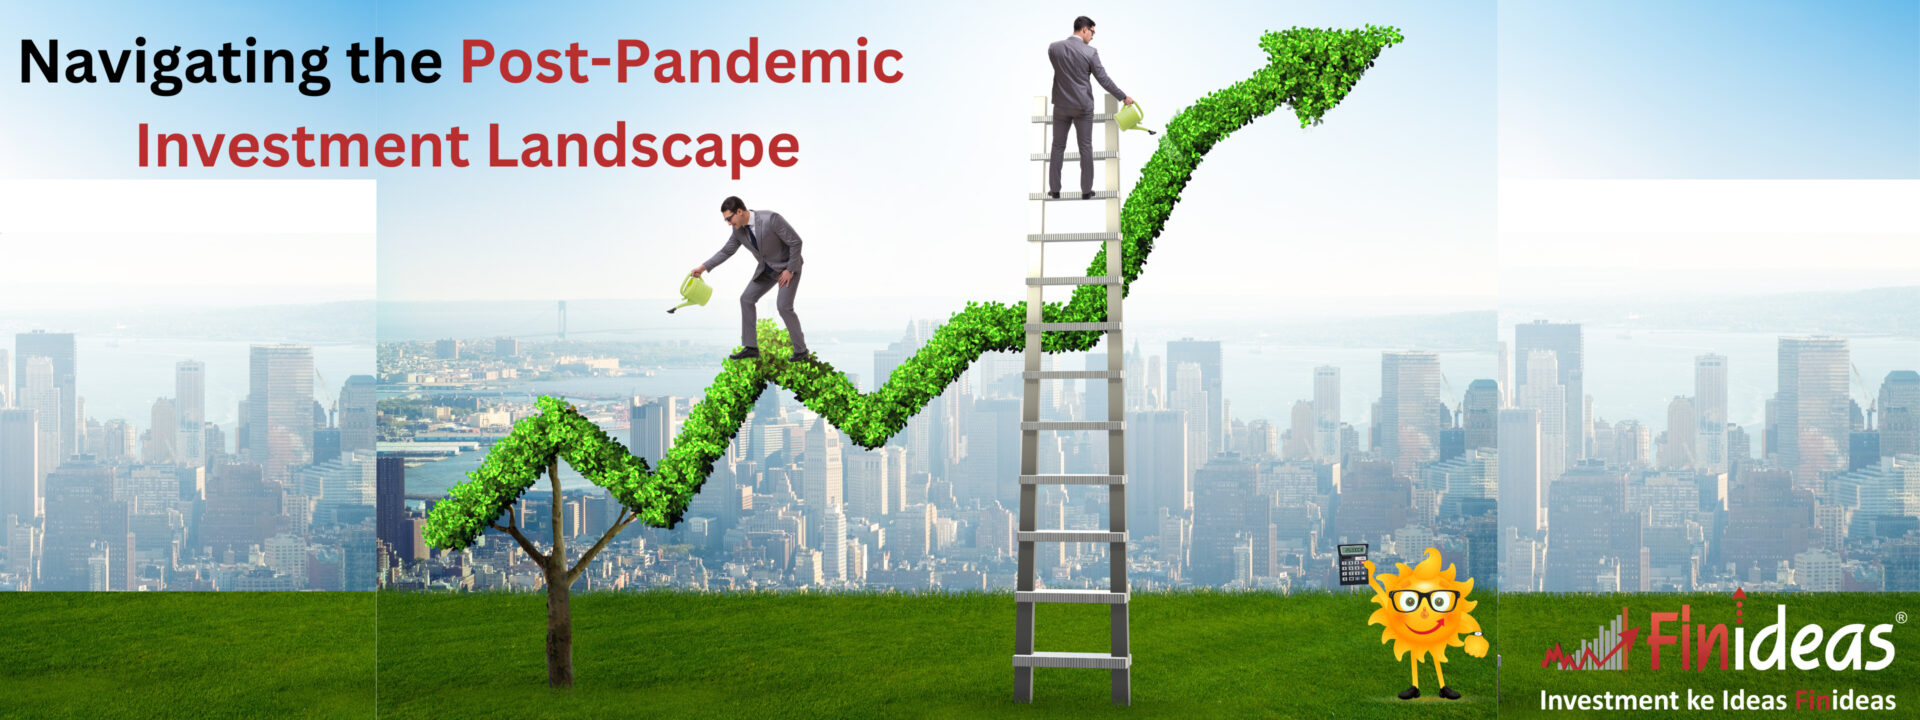 Navigating the Post-Pandemic Investment Landscape: Trends and Opportunities